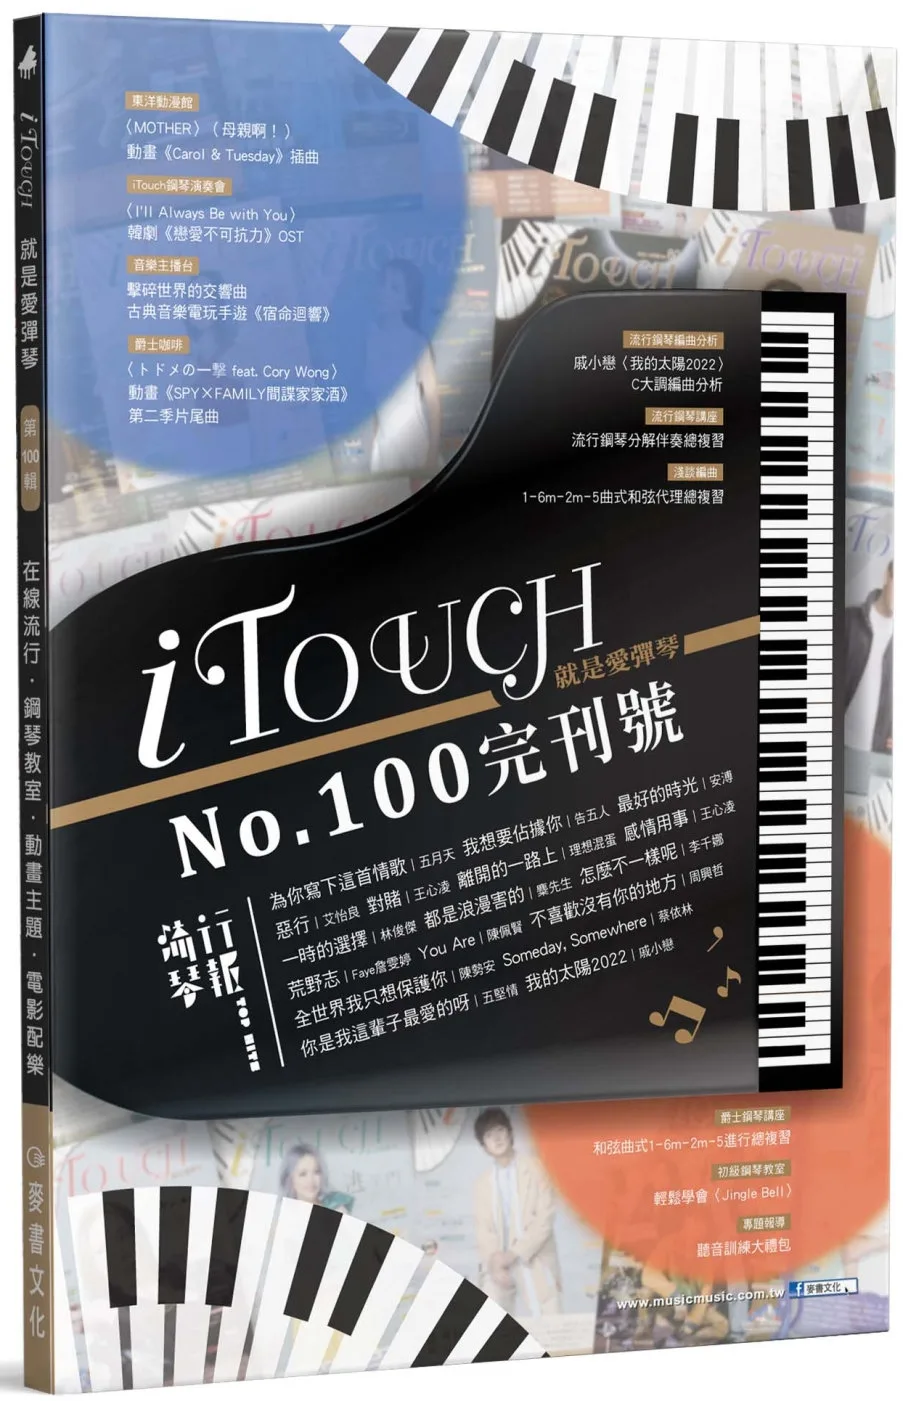 iTouch就是愛彈琴１００